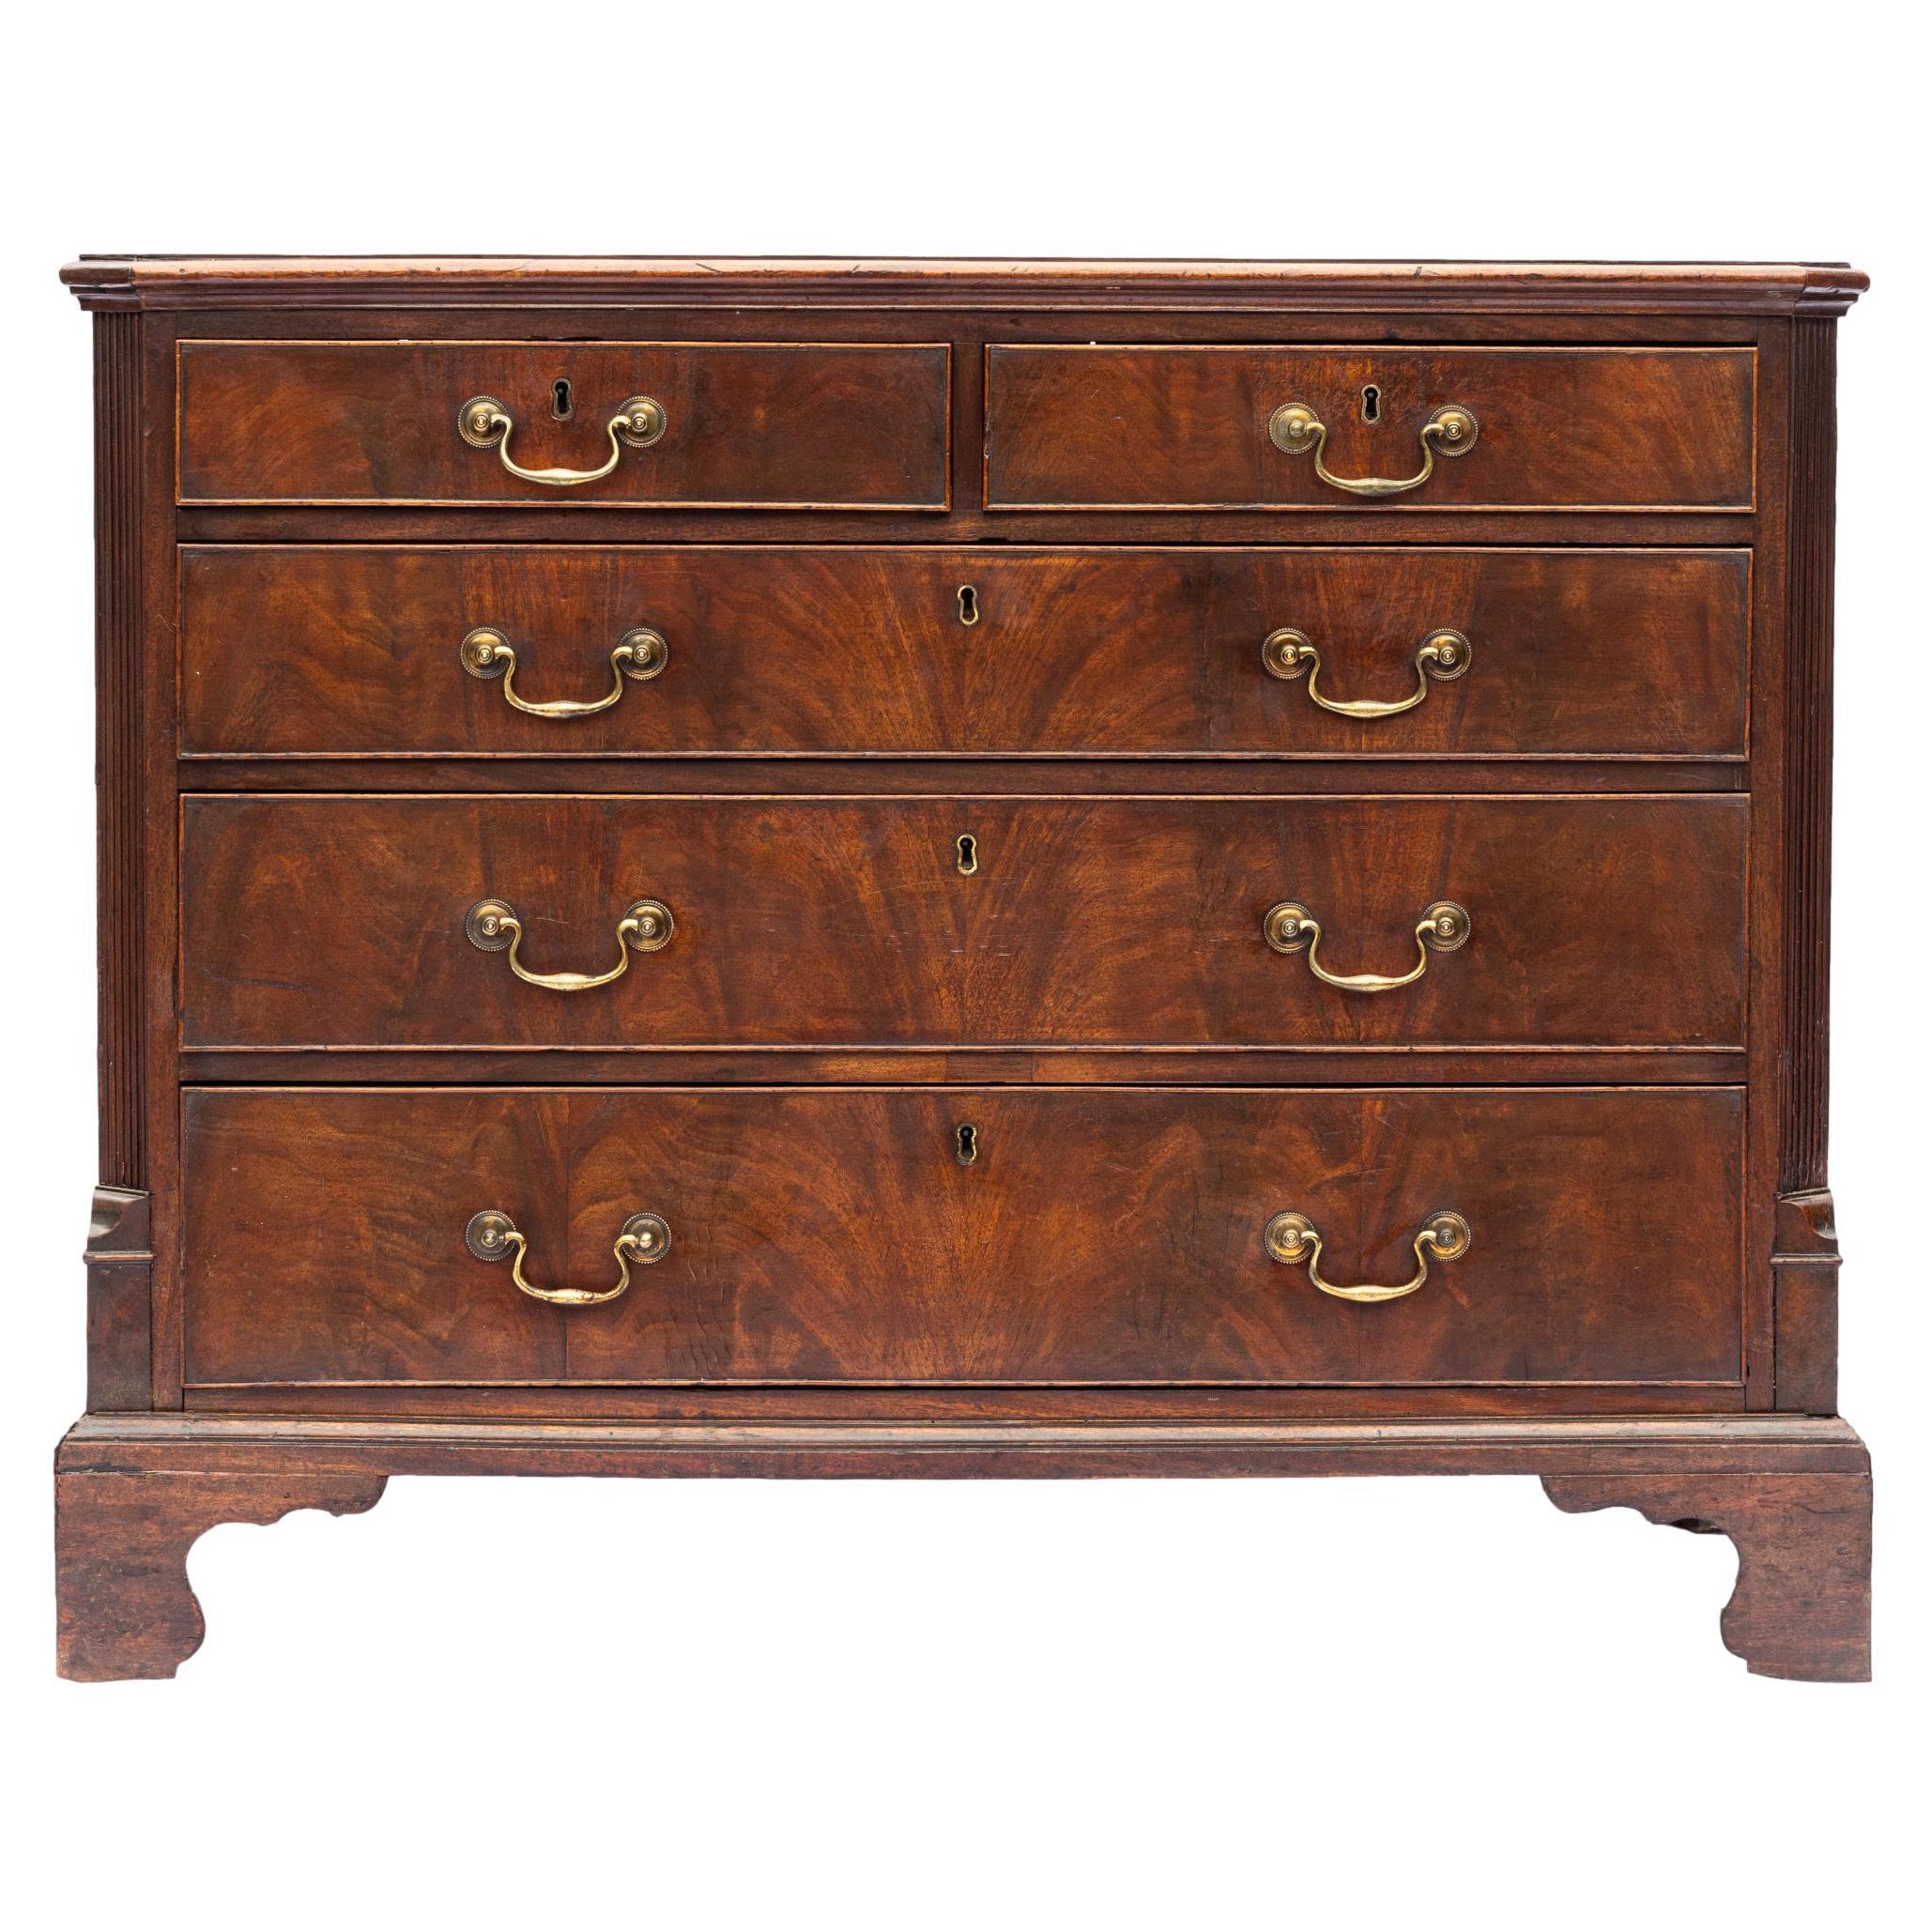 George III Mahogany Chest with Banded Top, Canted Corners, and Reeded Posts, 